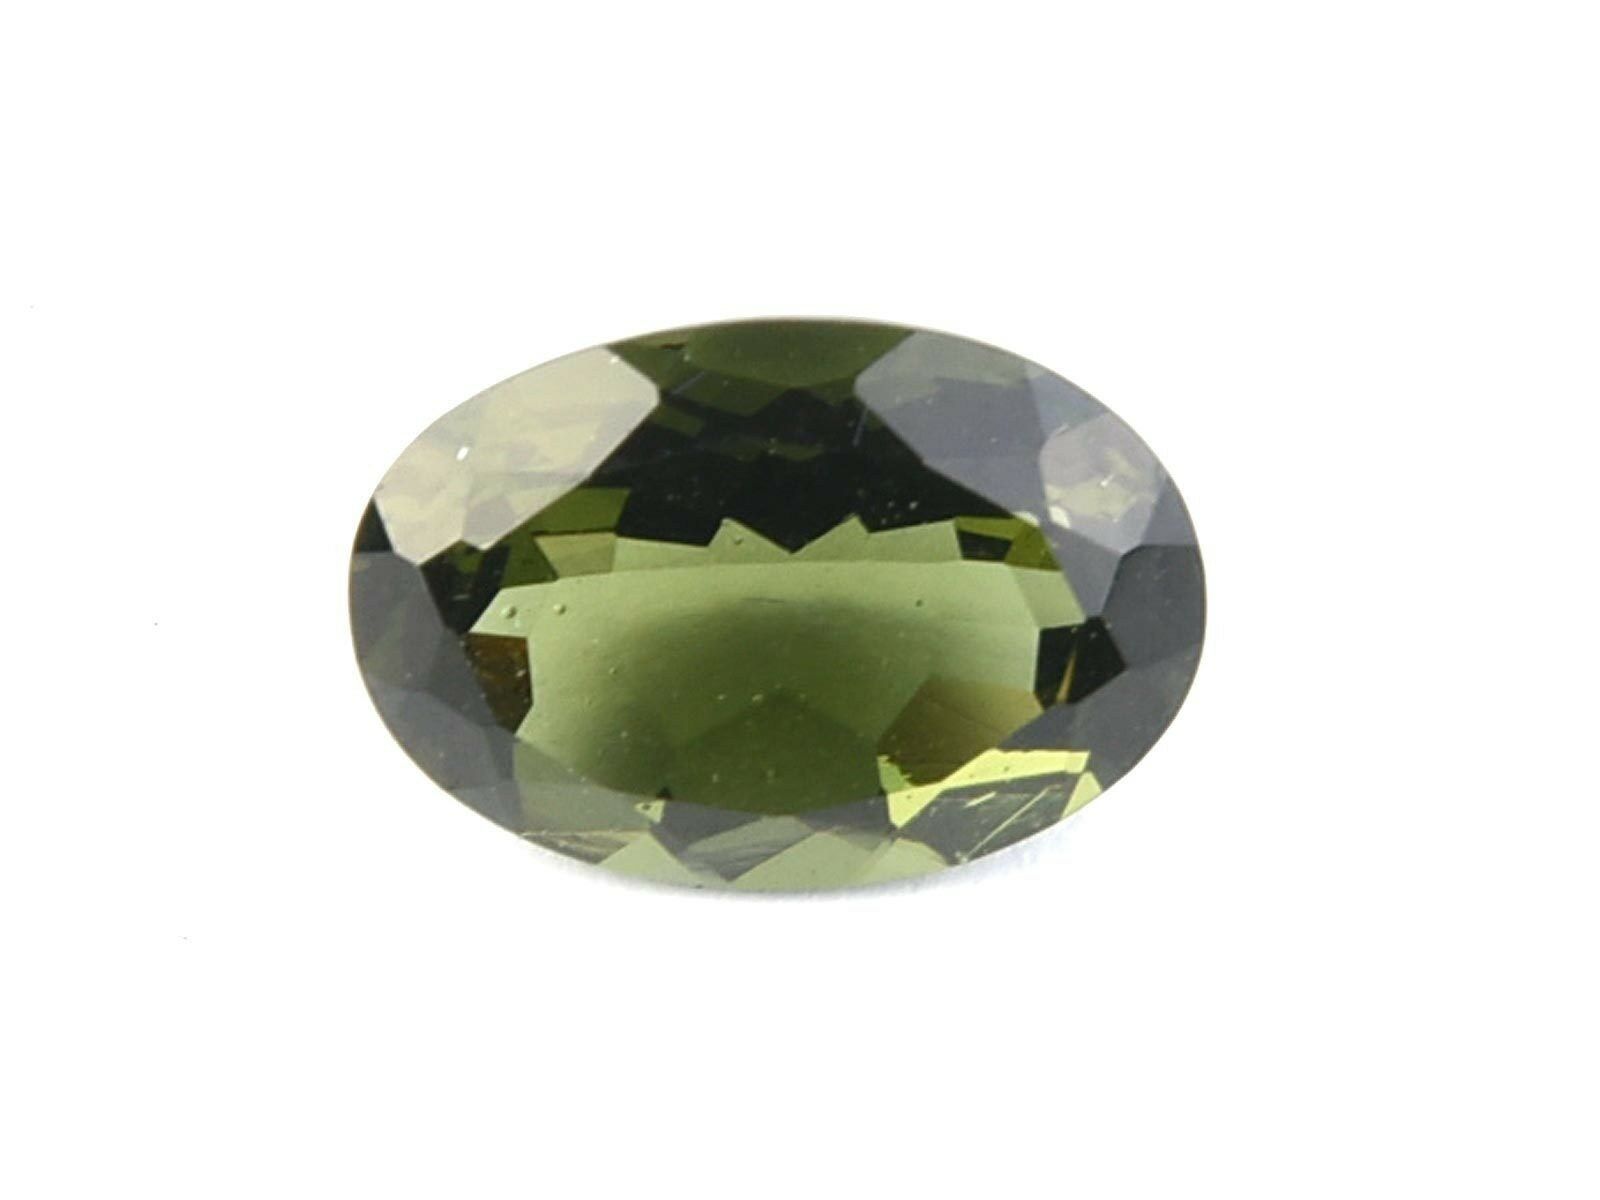 3.37cts Oval 9x12mm Standard Cut Moldavite Faceted Cutted Gem Brus1694